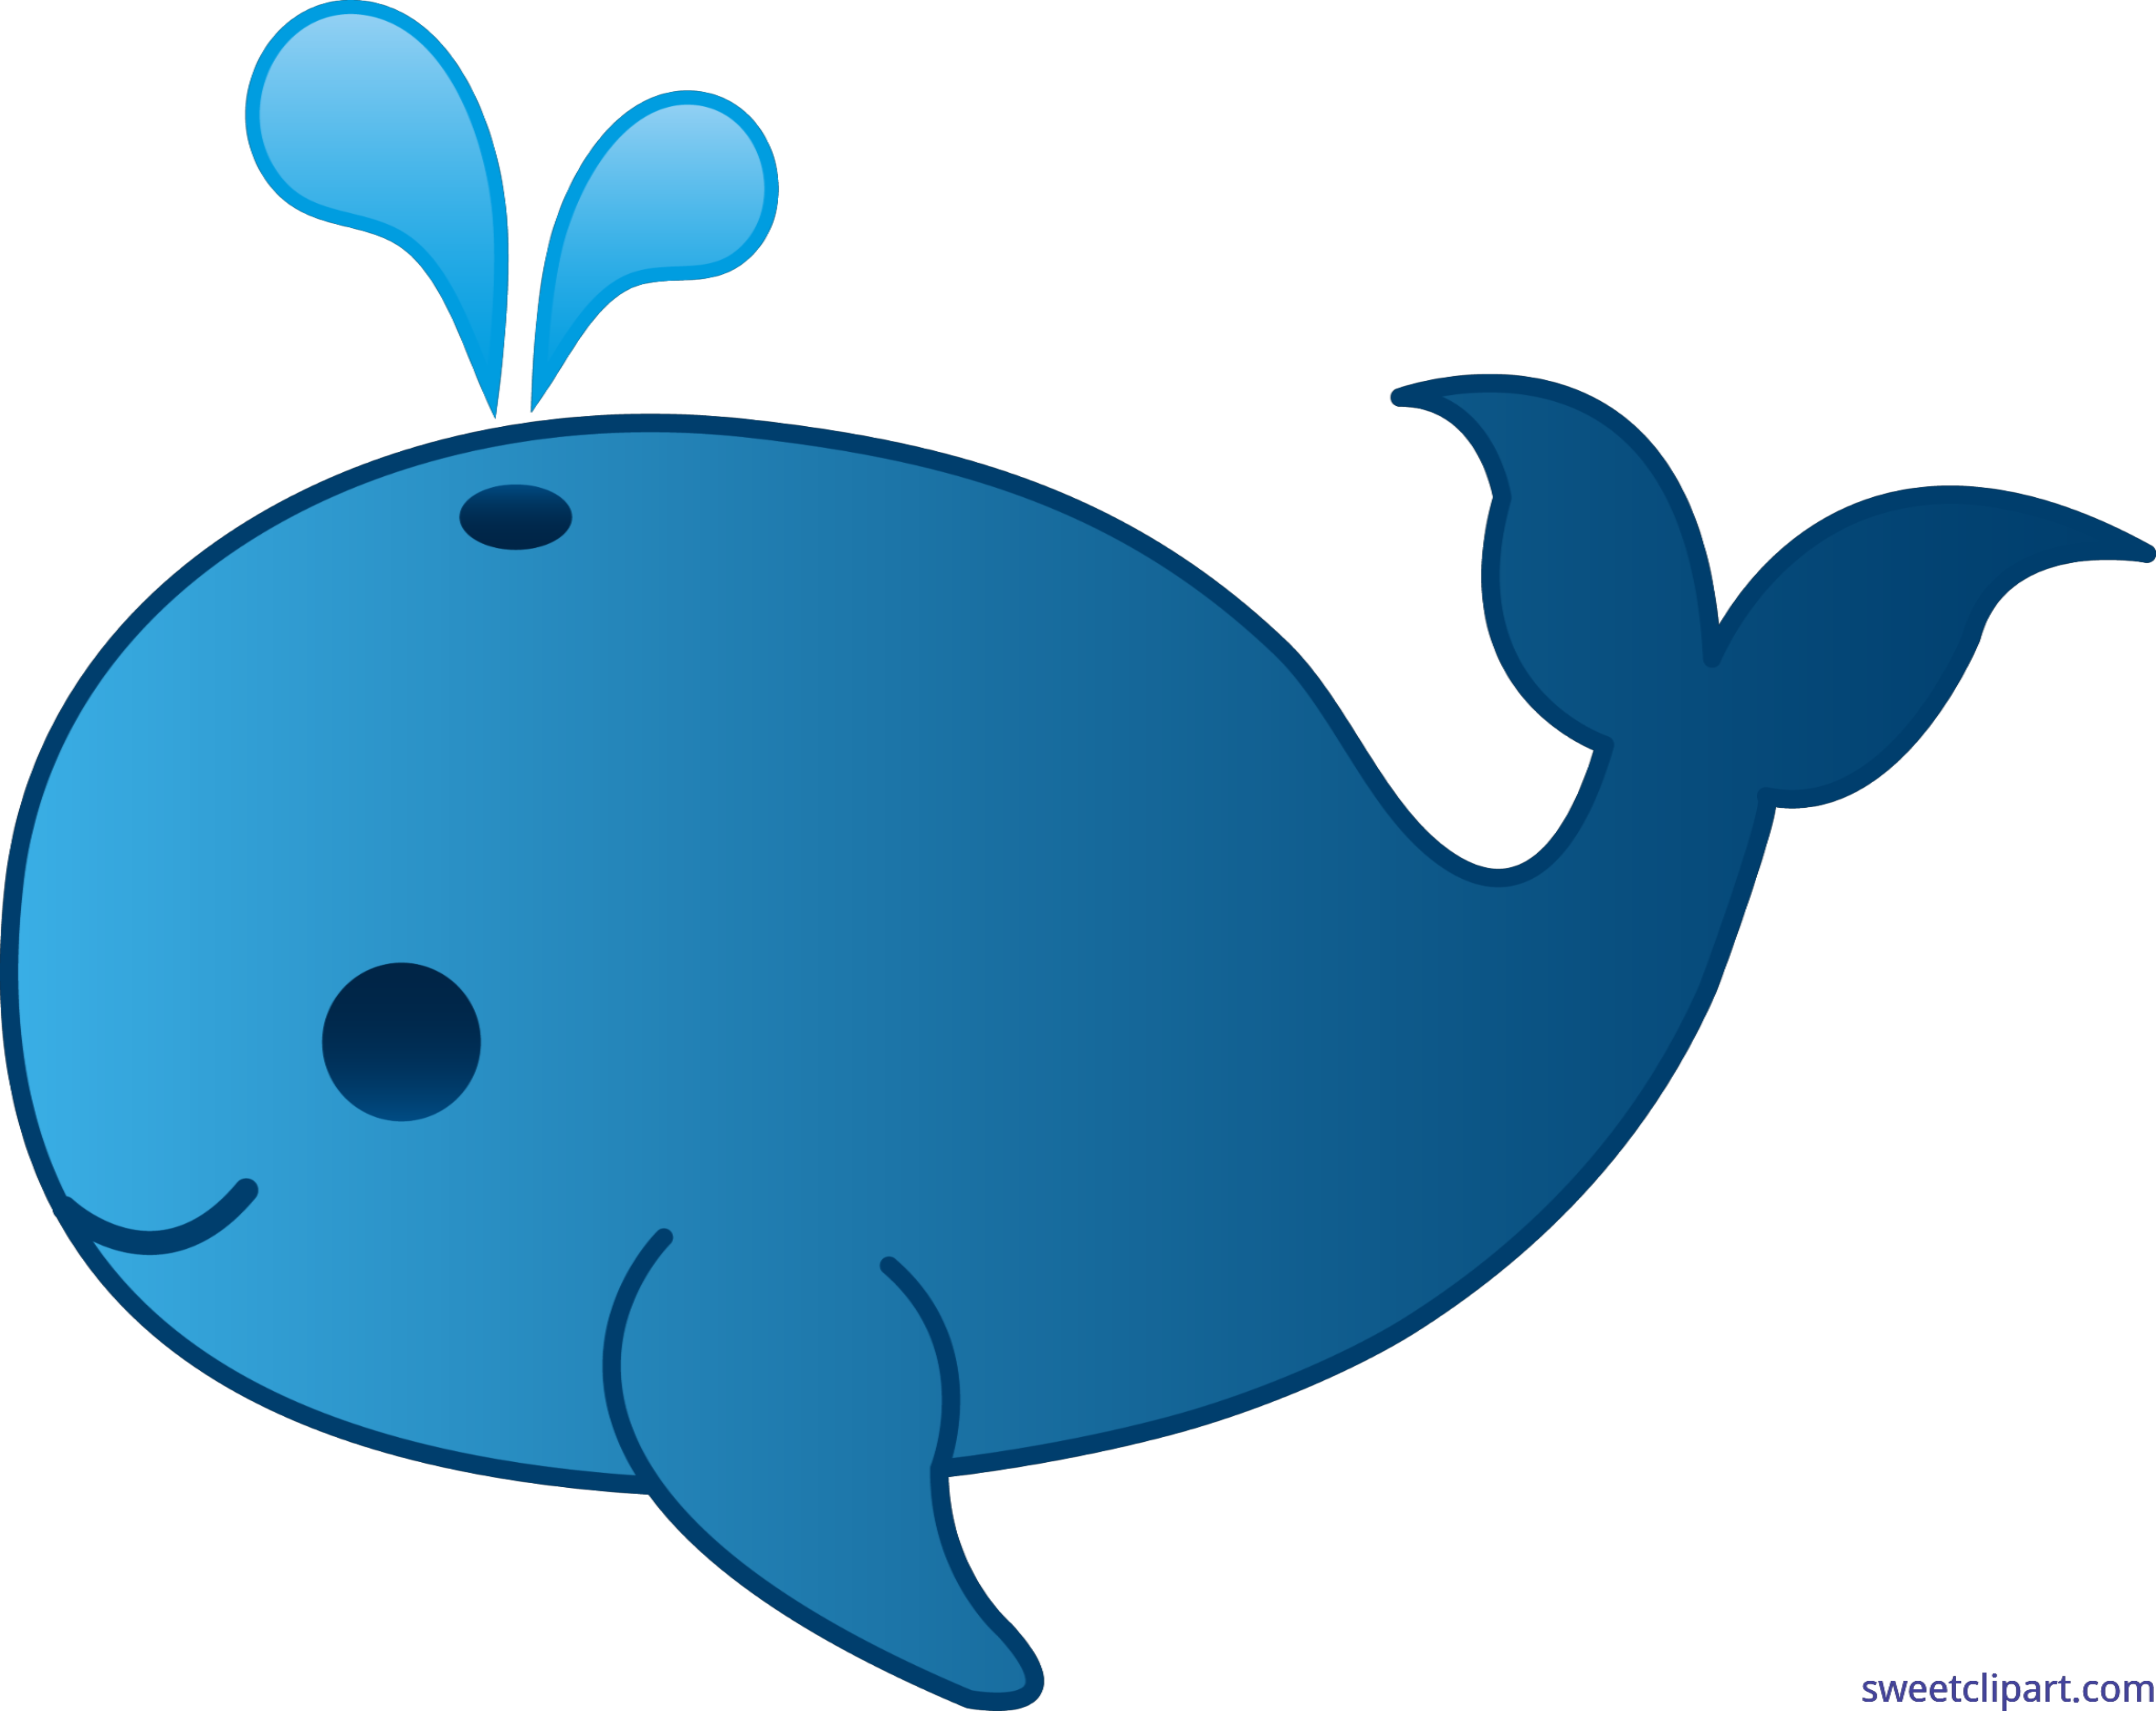 Cute Pictures Of Whales PNG - 164099